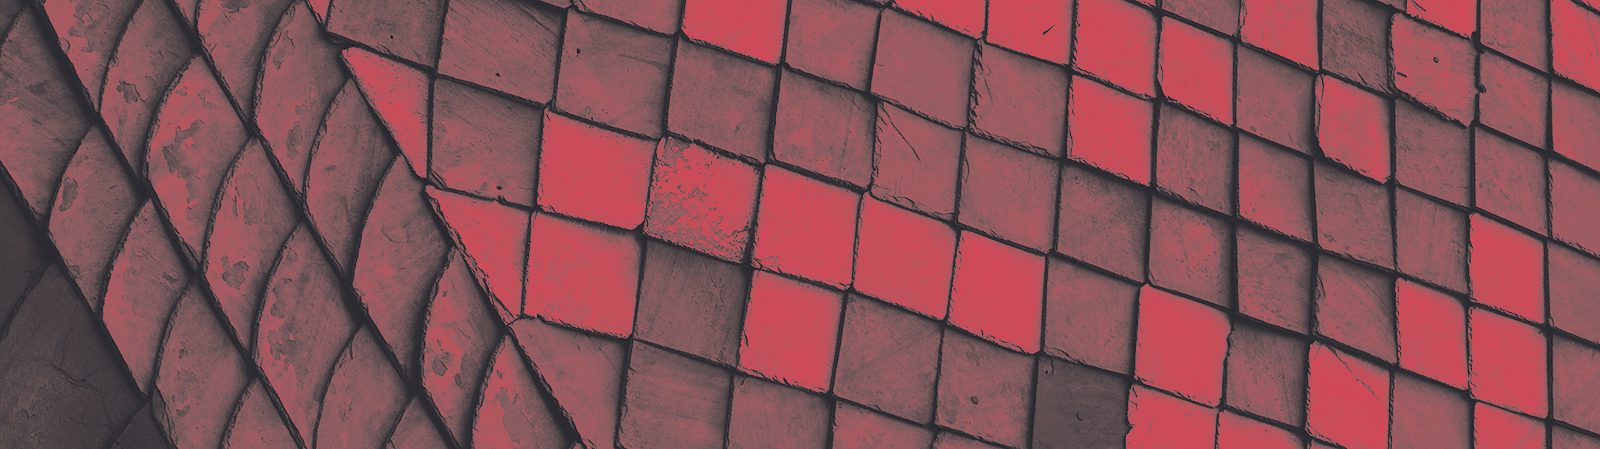 Roof tiles in duotone colors